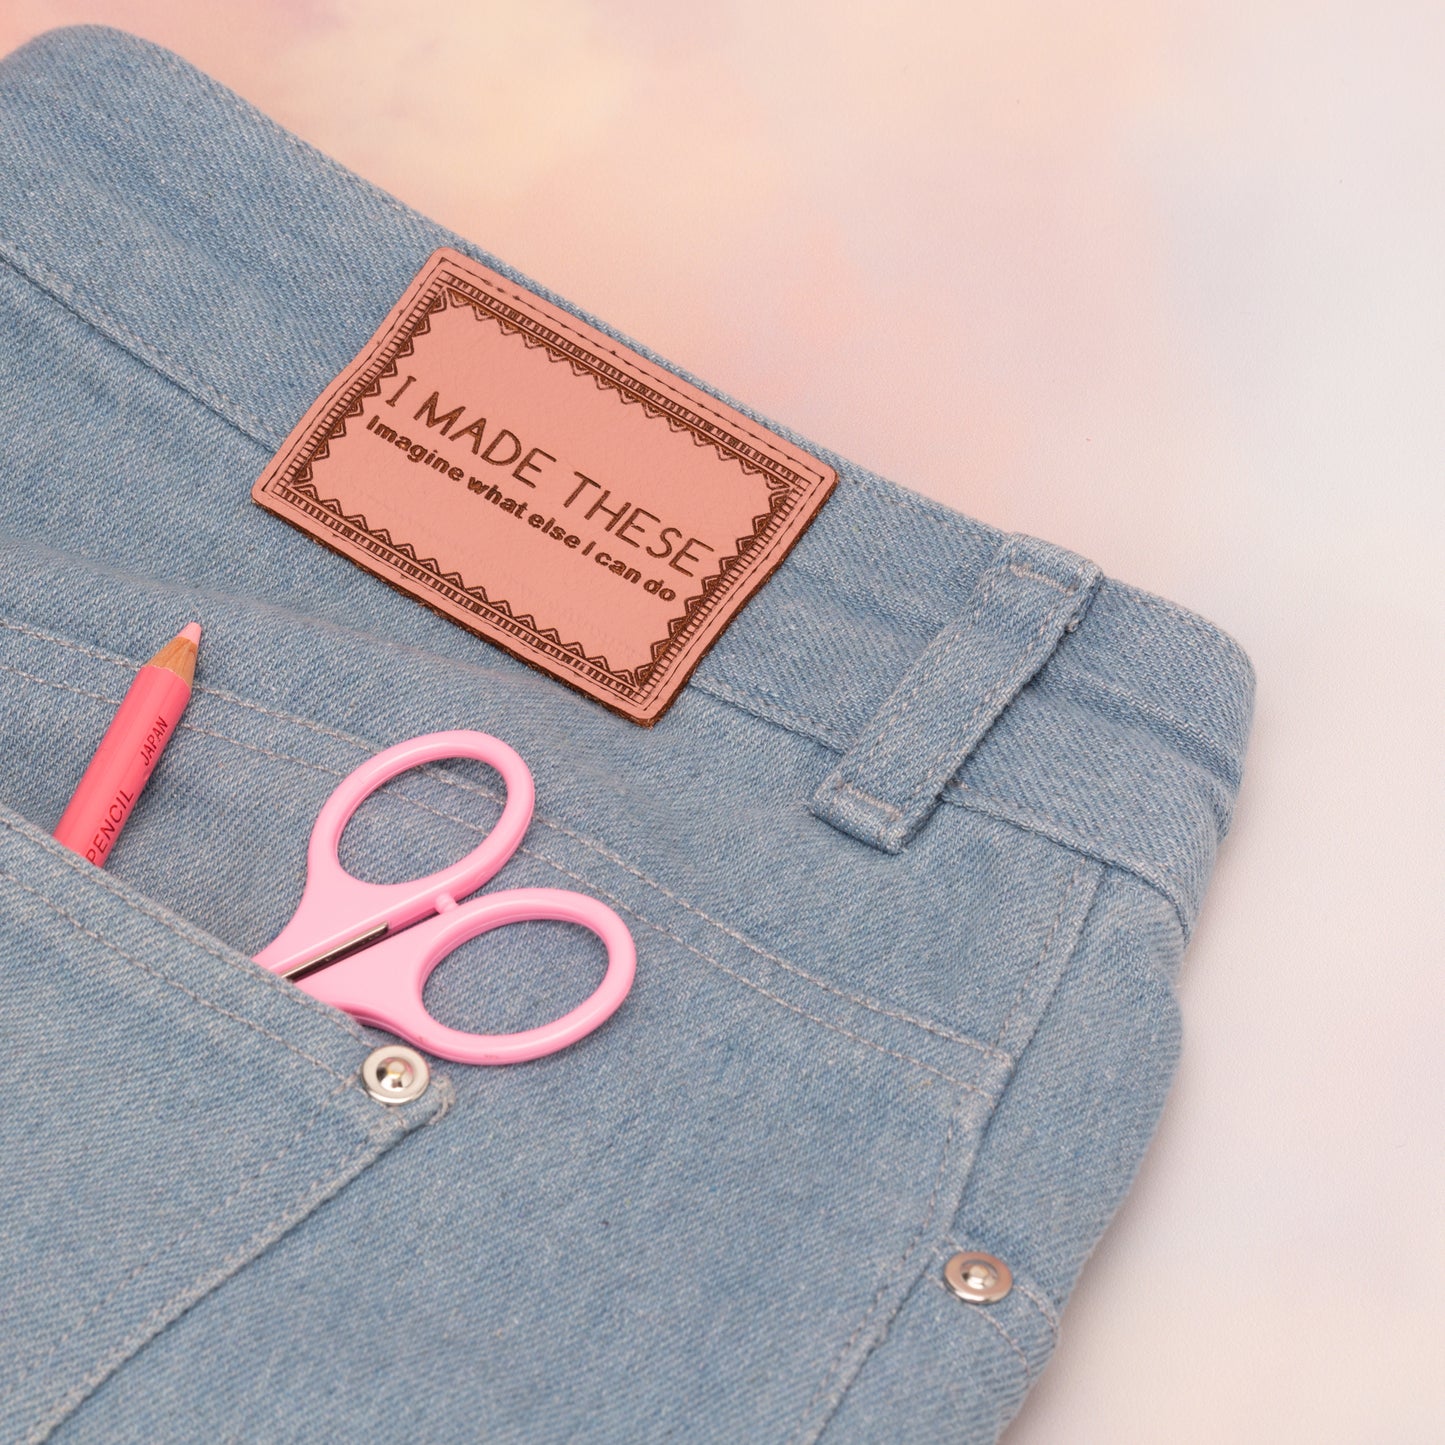 I MADE THESE - Pack of 2 Leather Jeans Labels - Dusky Pink